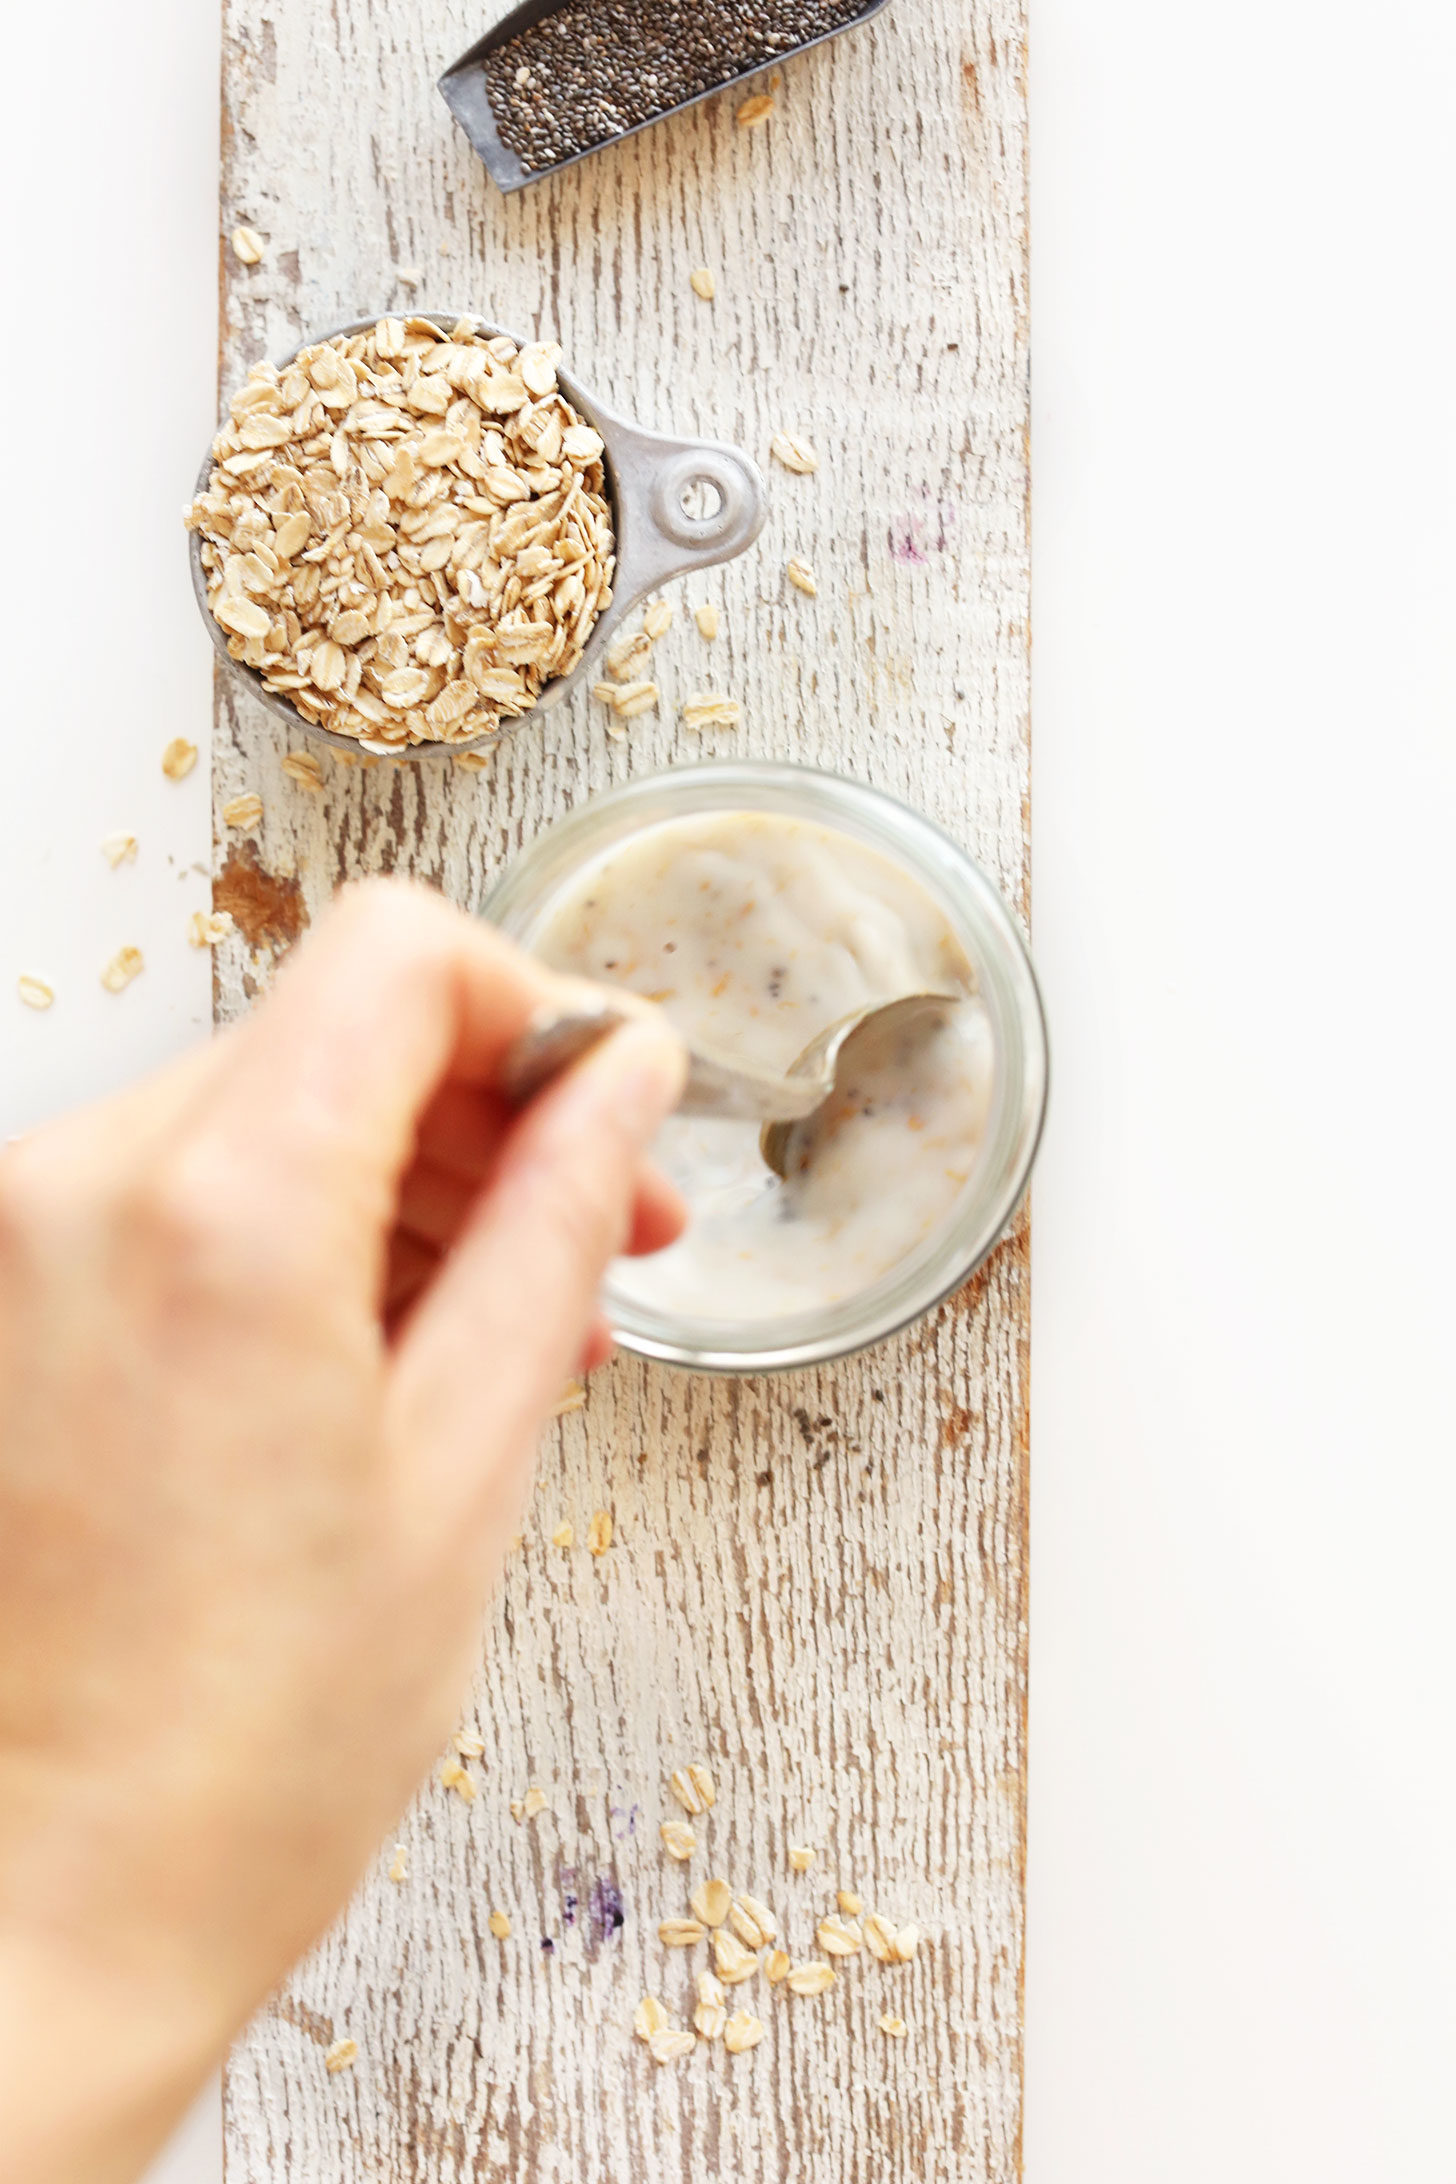 Stirring together a jar of Peanut Butter Overnight Oats for a healthy gluten-free vegan breakfast